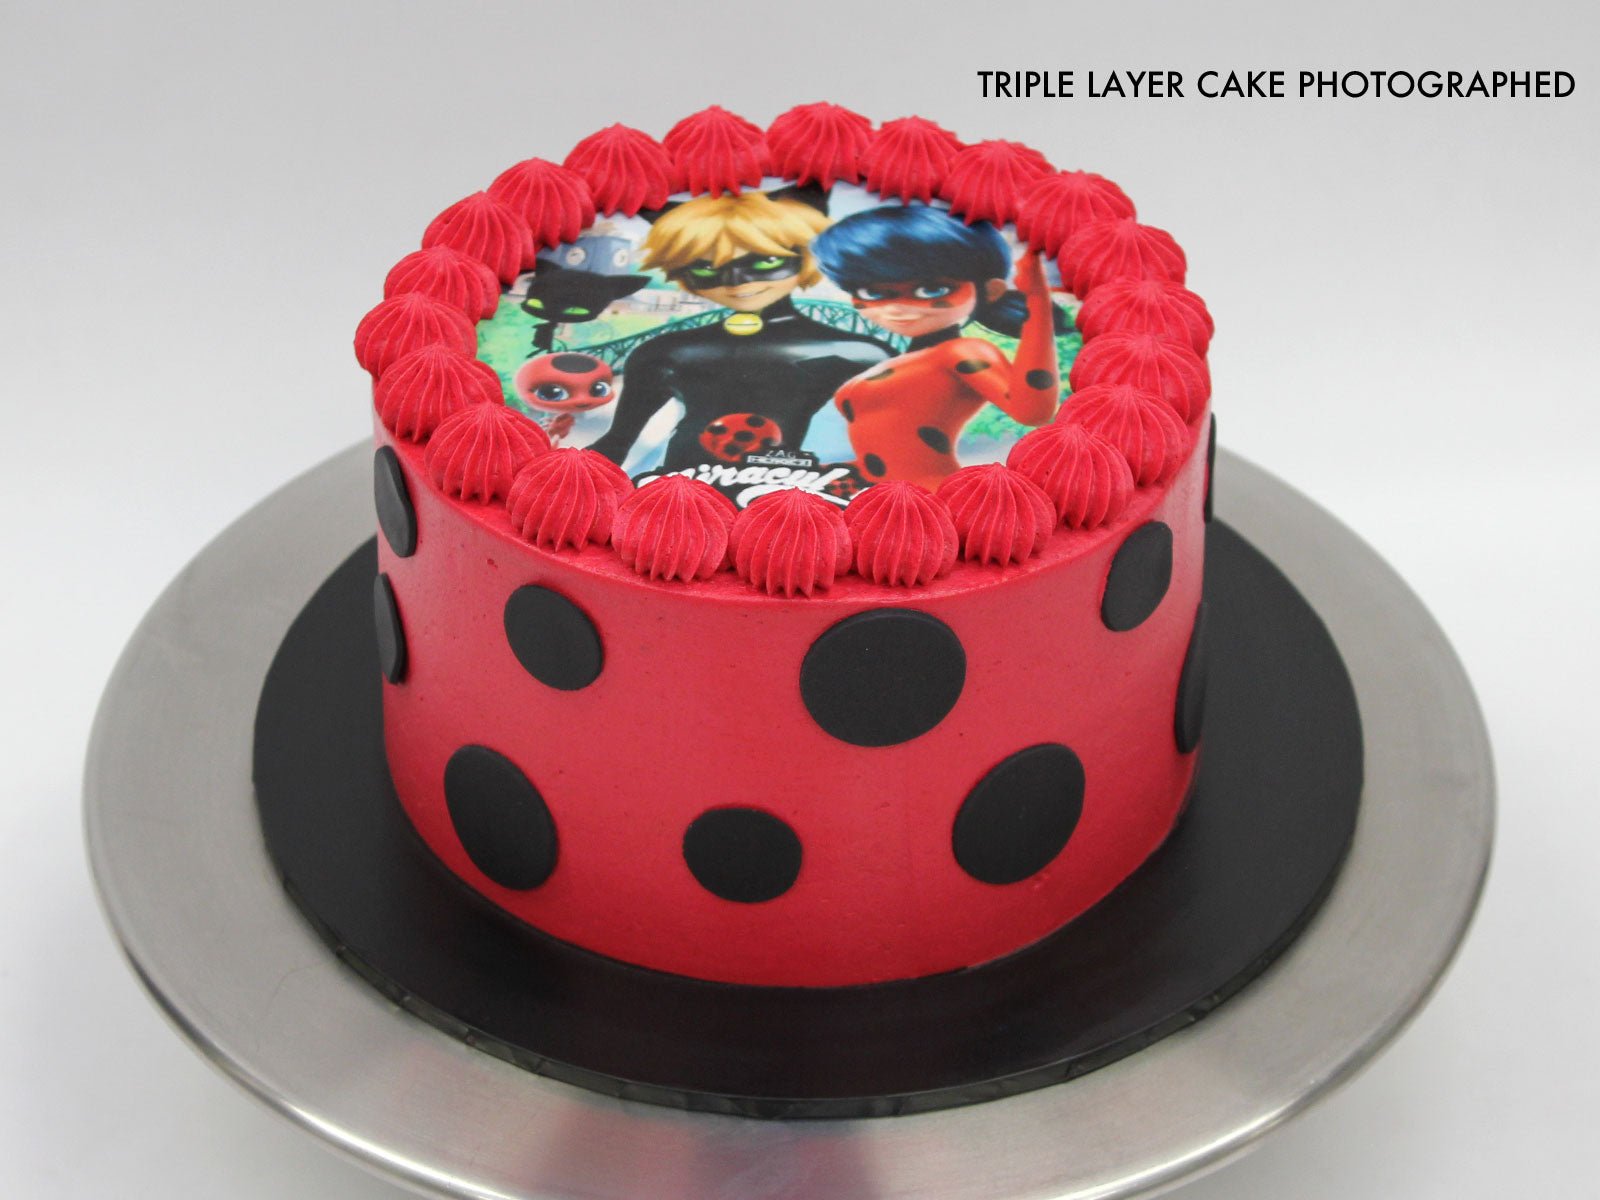 Ladybird Cake - Buy Online, Free UK Delivery — New Cakes